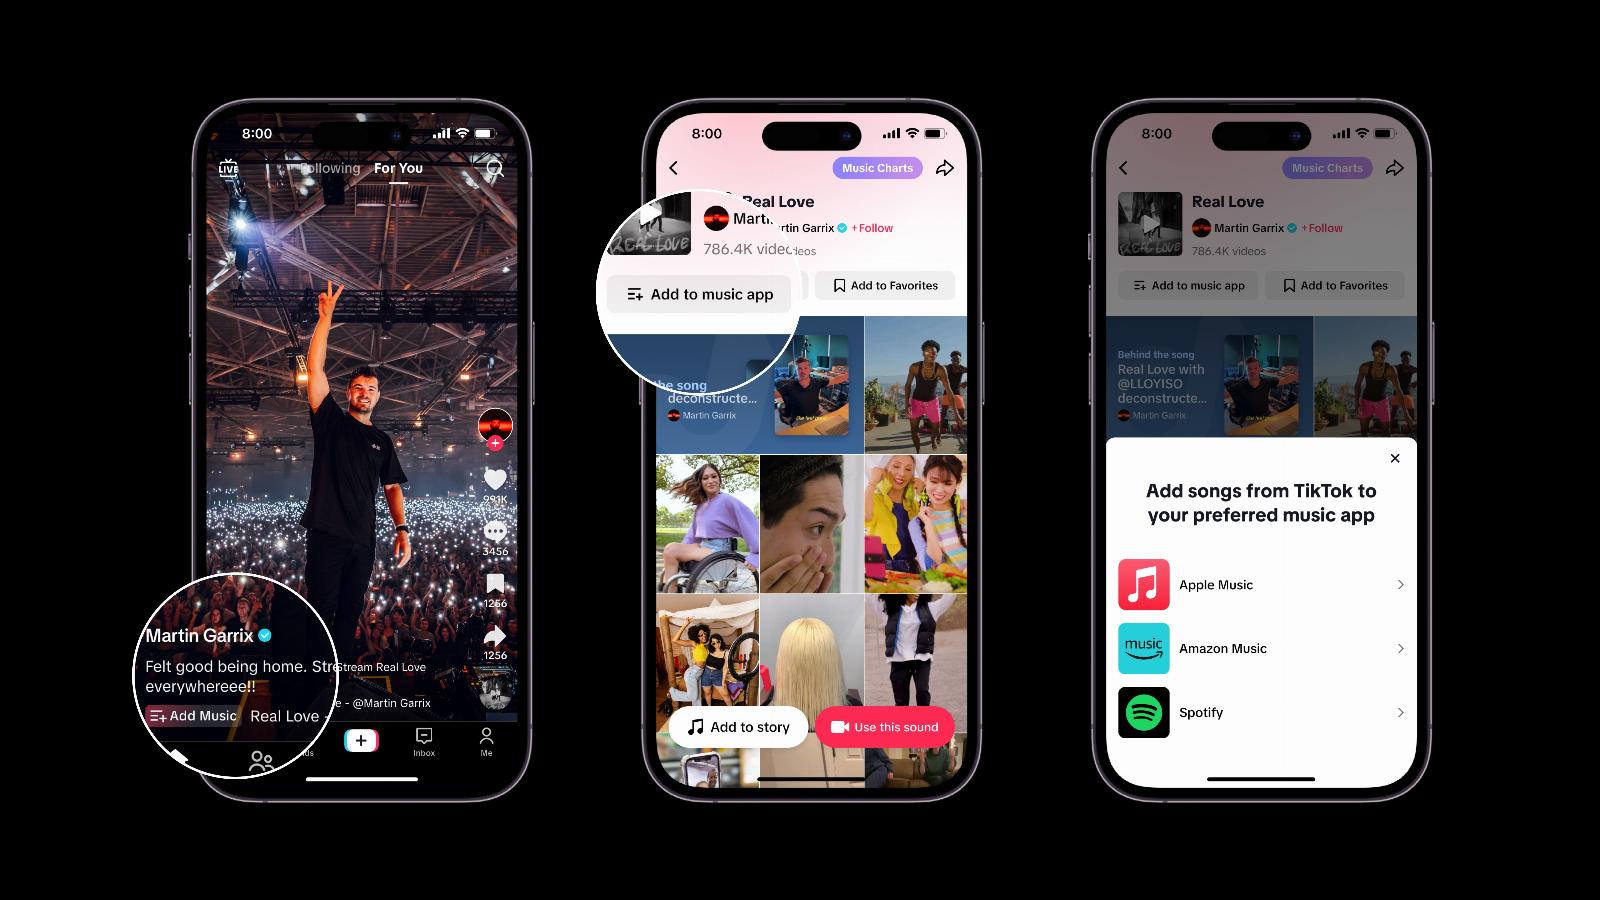 TikTok’s newest feature lets you save favorite songs directly to Spotify or Amazon Music